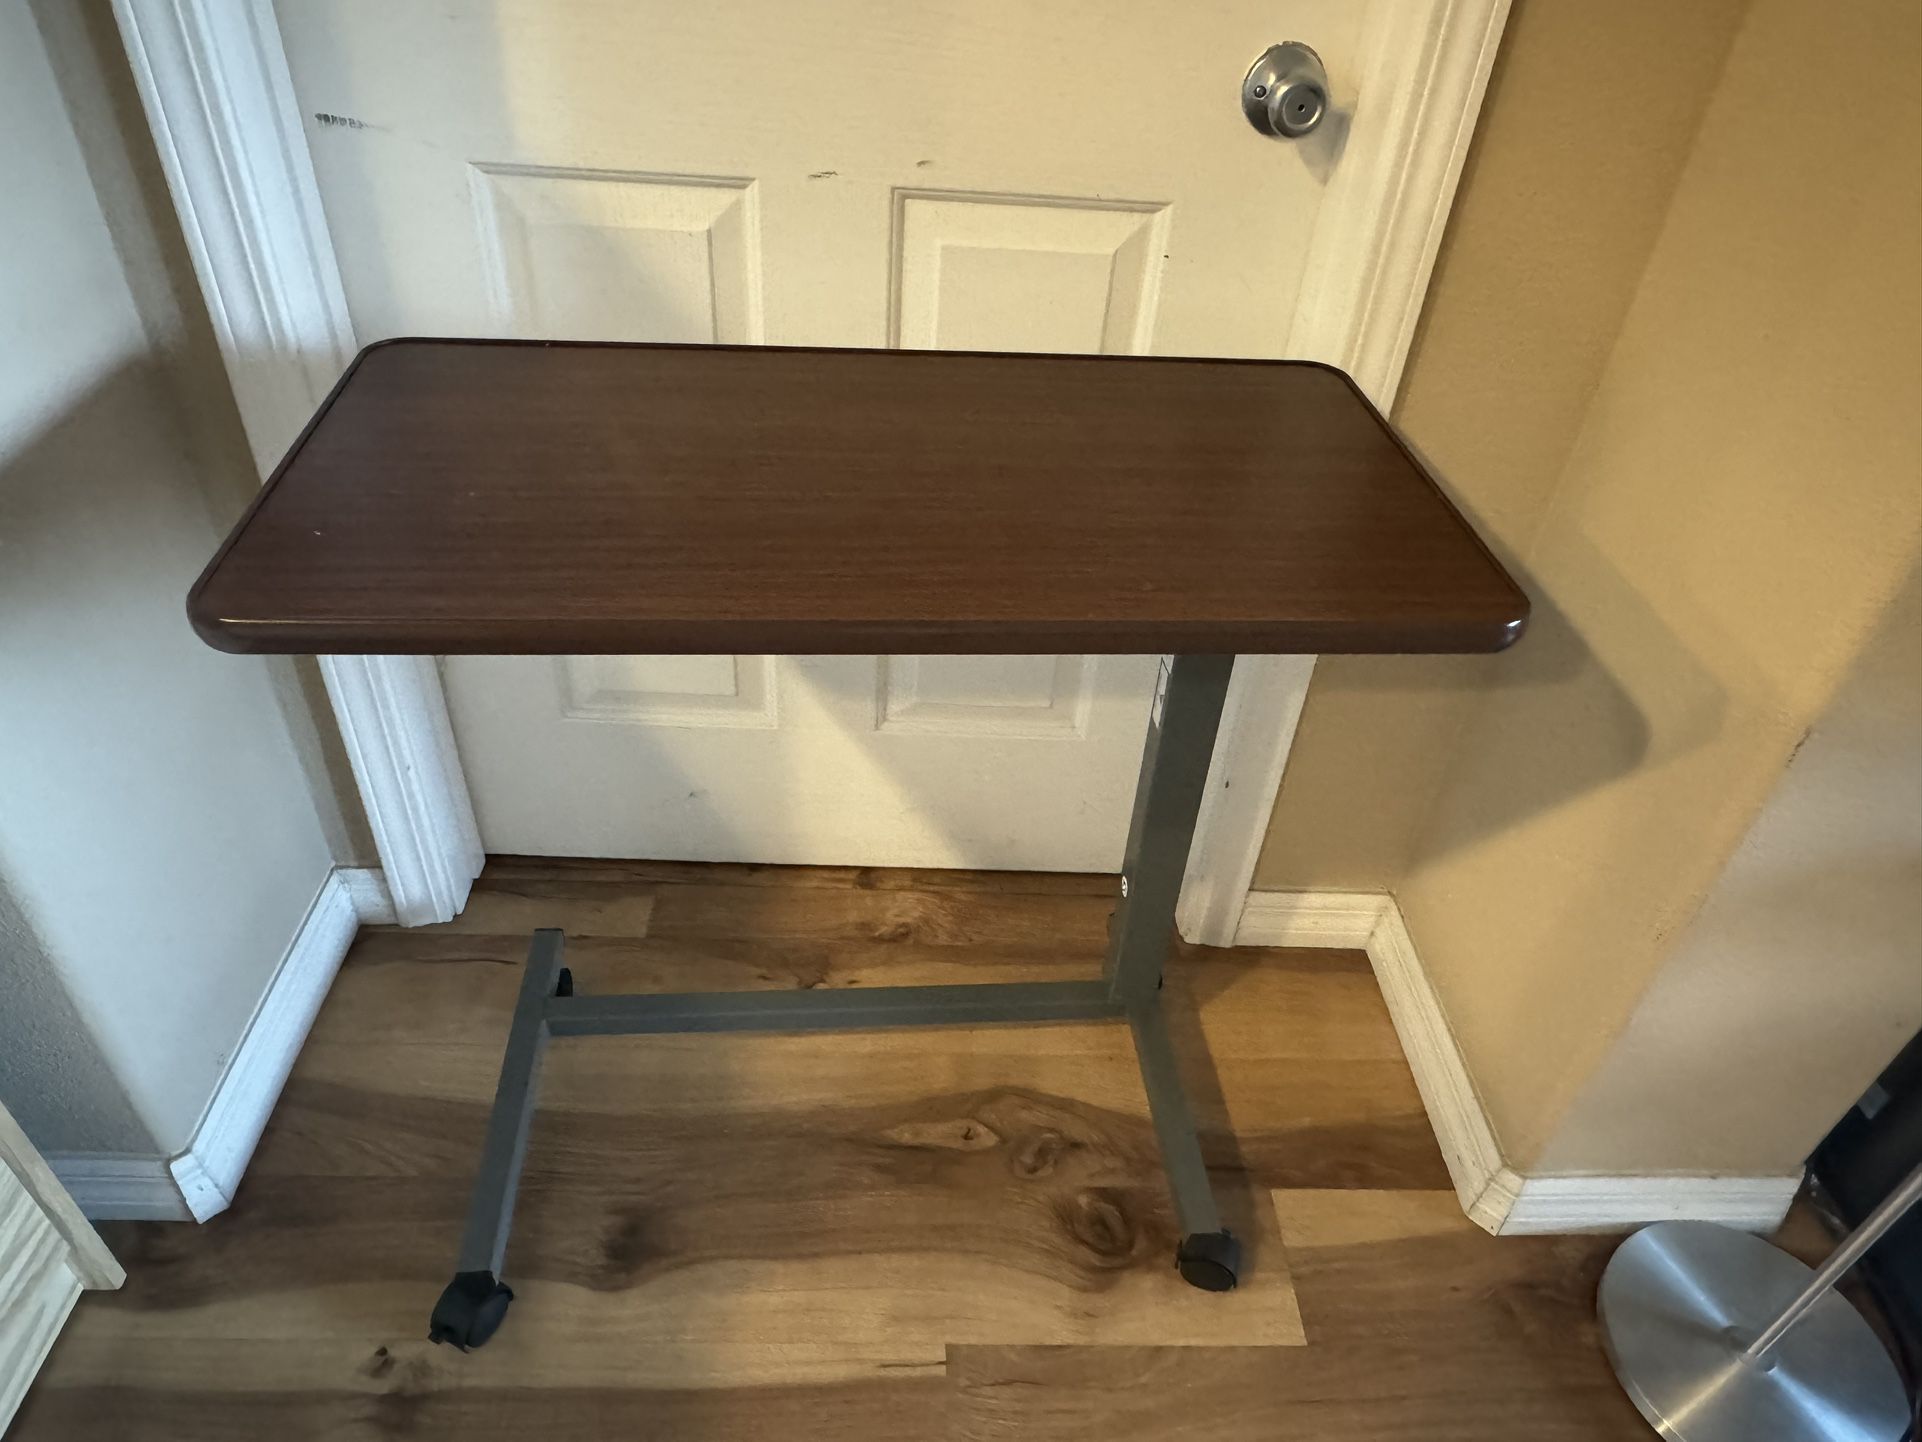 Height adjustable overbed table with wheels